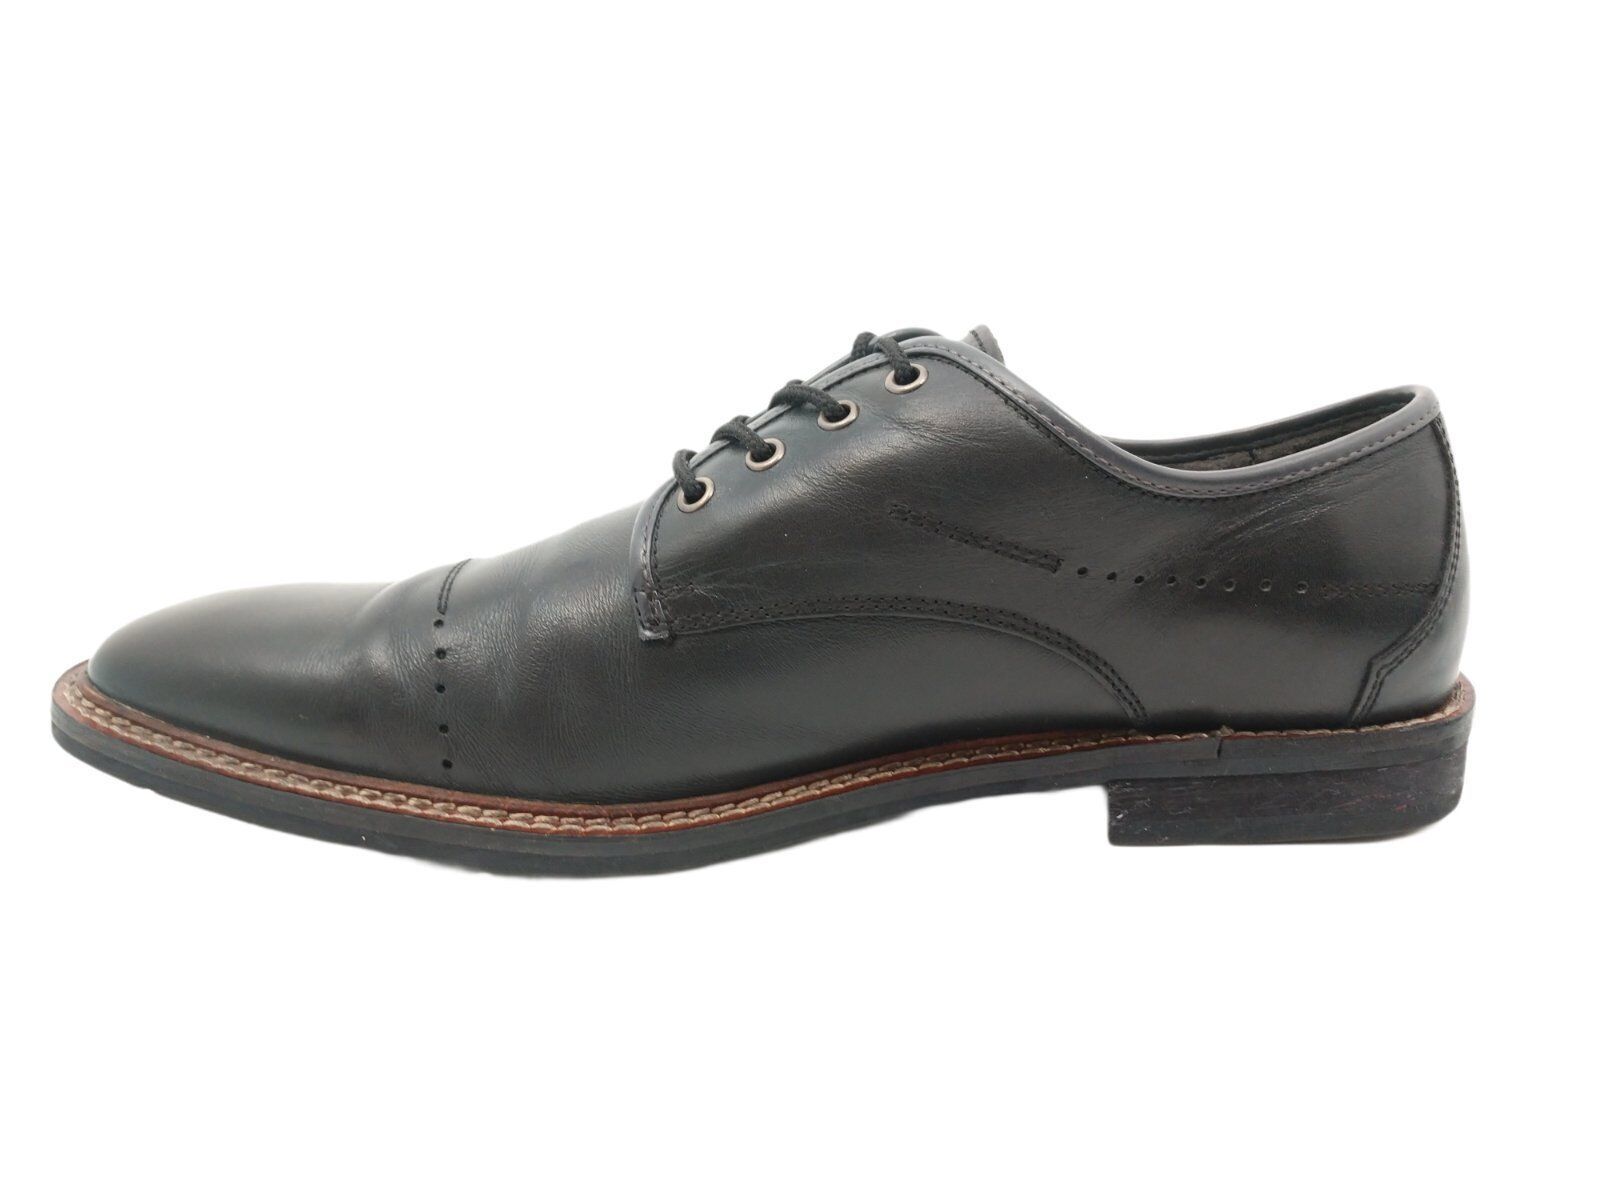 Primary image for Steve Madden Mens Mission Oxford Lace-up Black Leather Shoes Size 10.5 Black